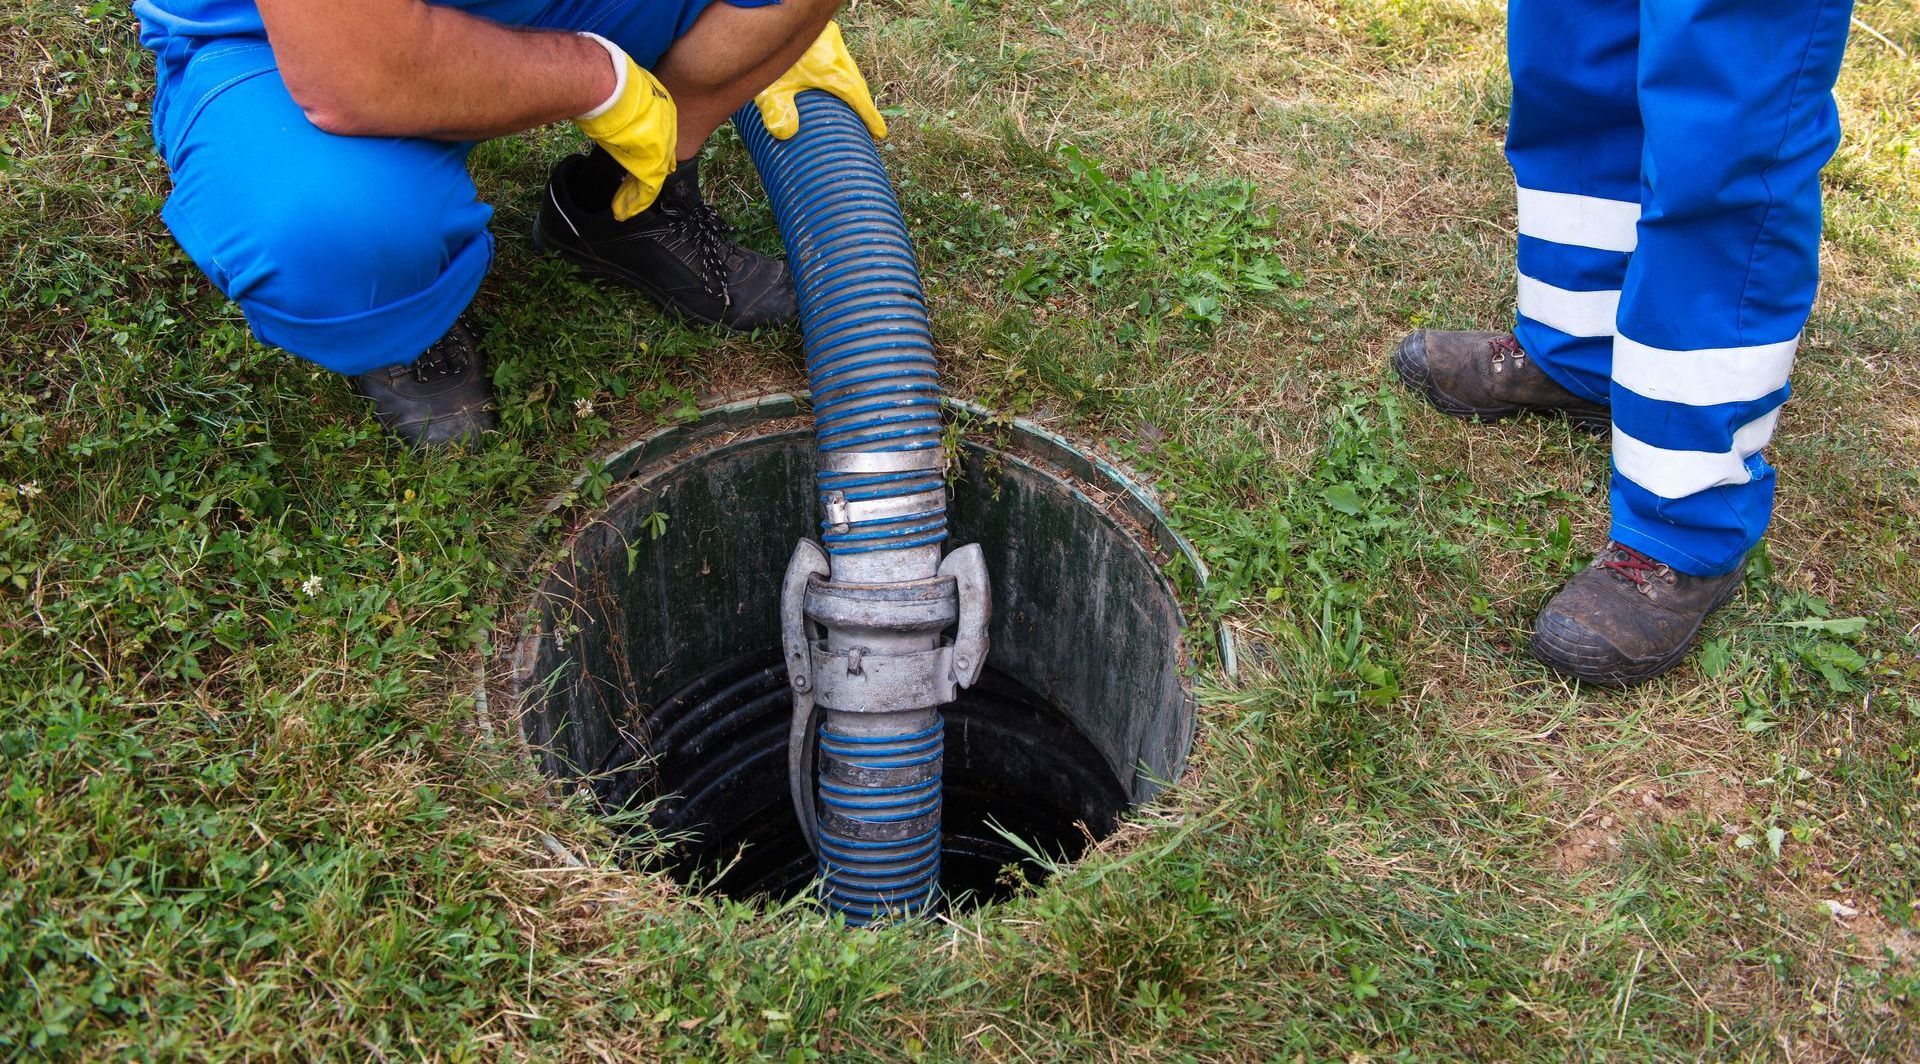 A man is pumping water into a septic tank with a hose.